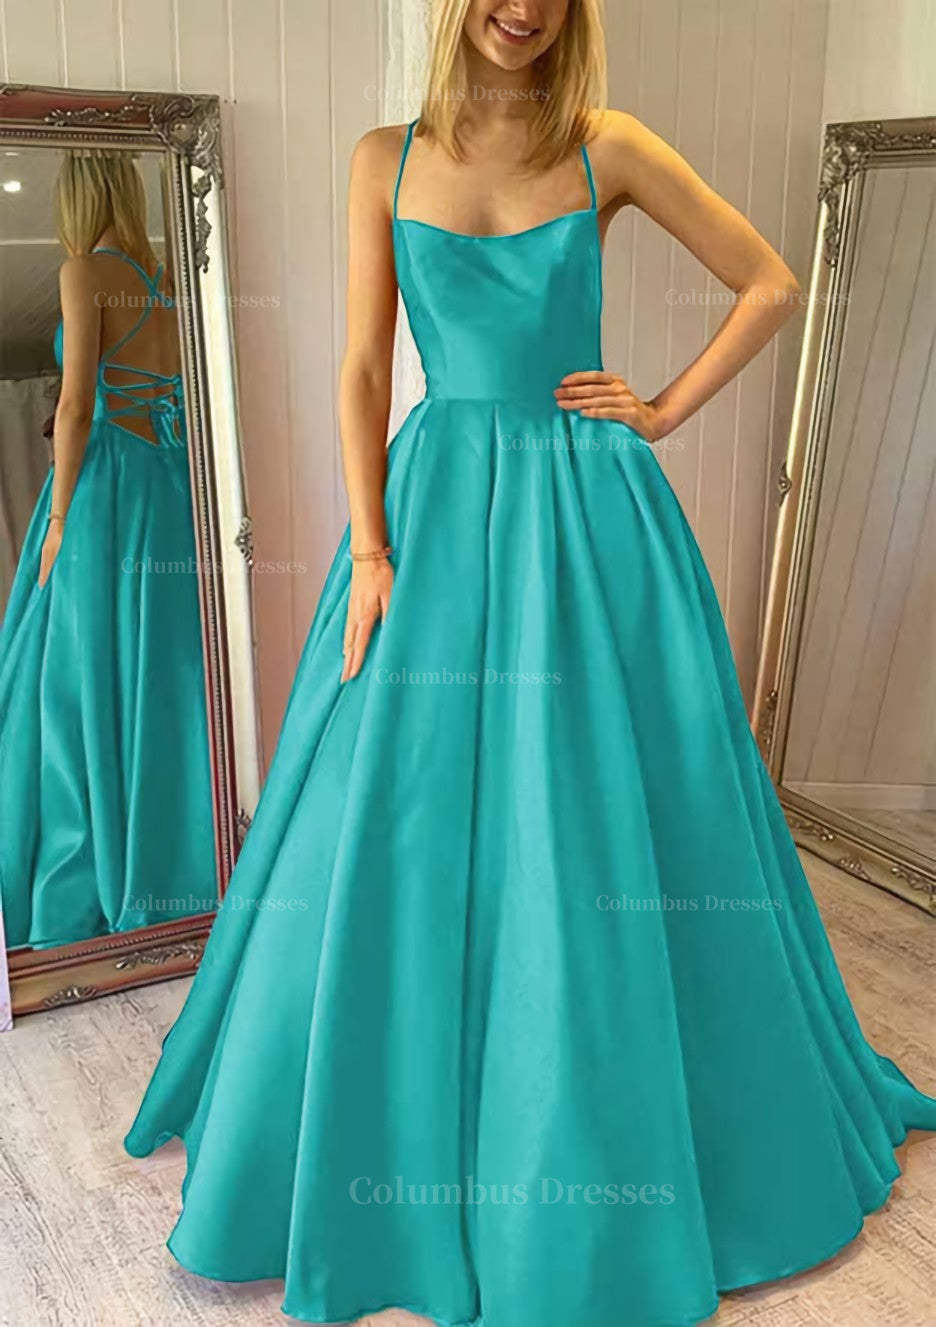 Prom Dresses Blues, Ball Gown Square Neckline Sleeveless Satin Sweep Train Prom Dress With Pleated Pockets